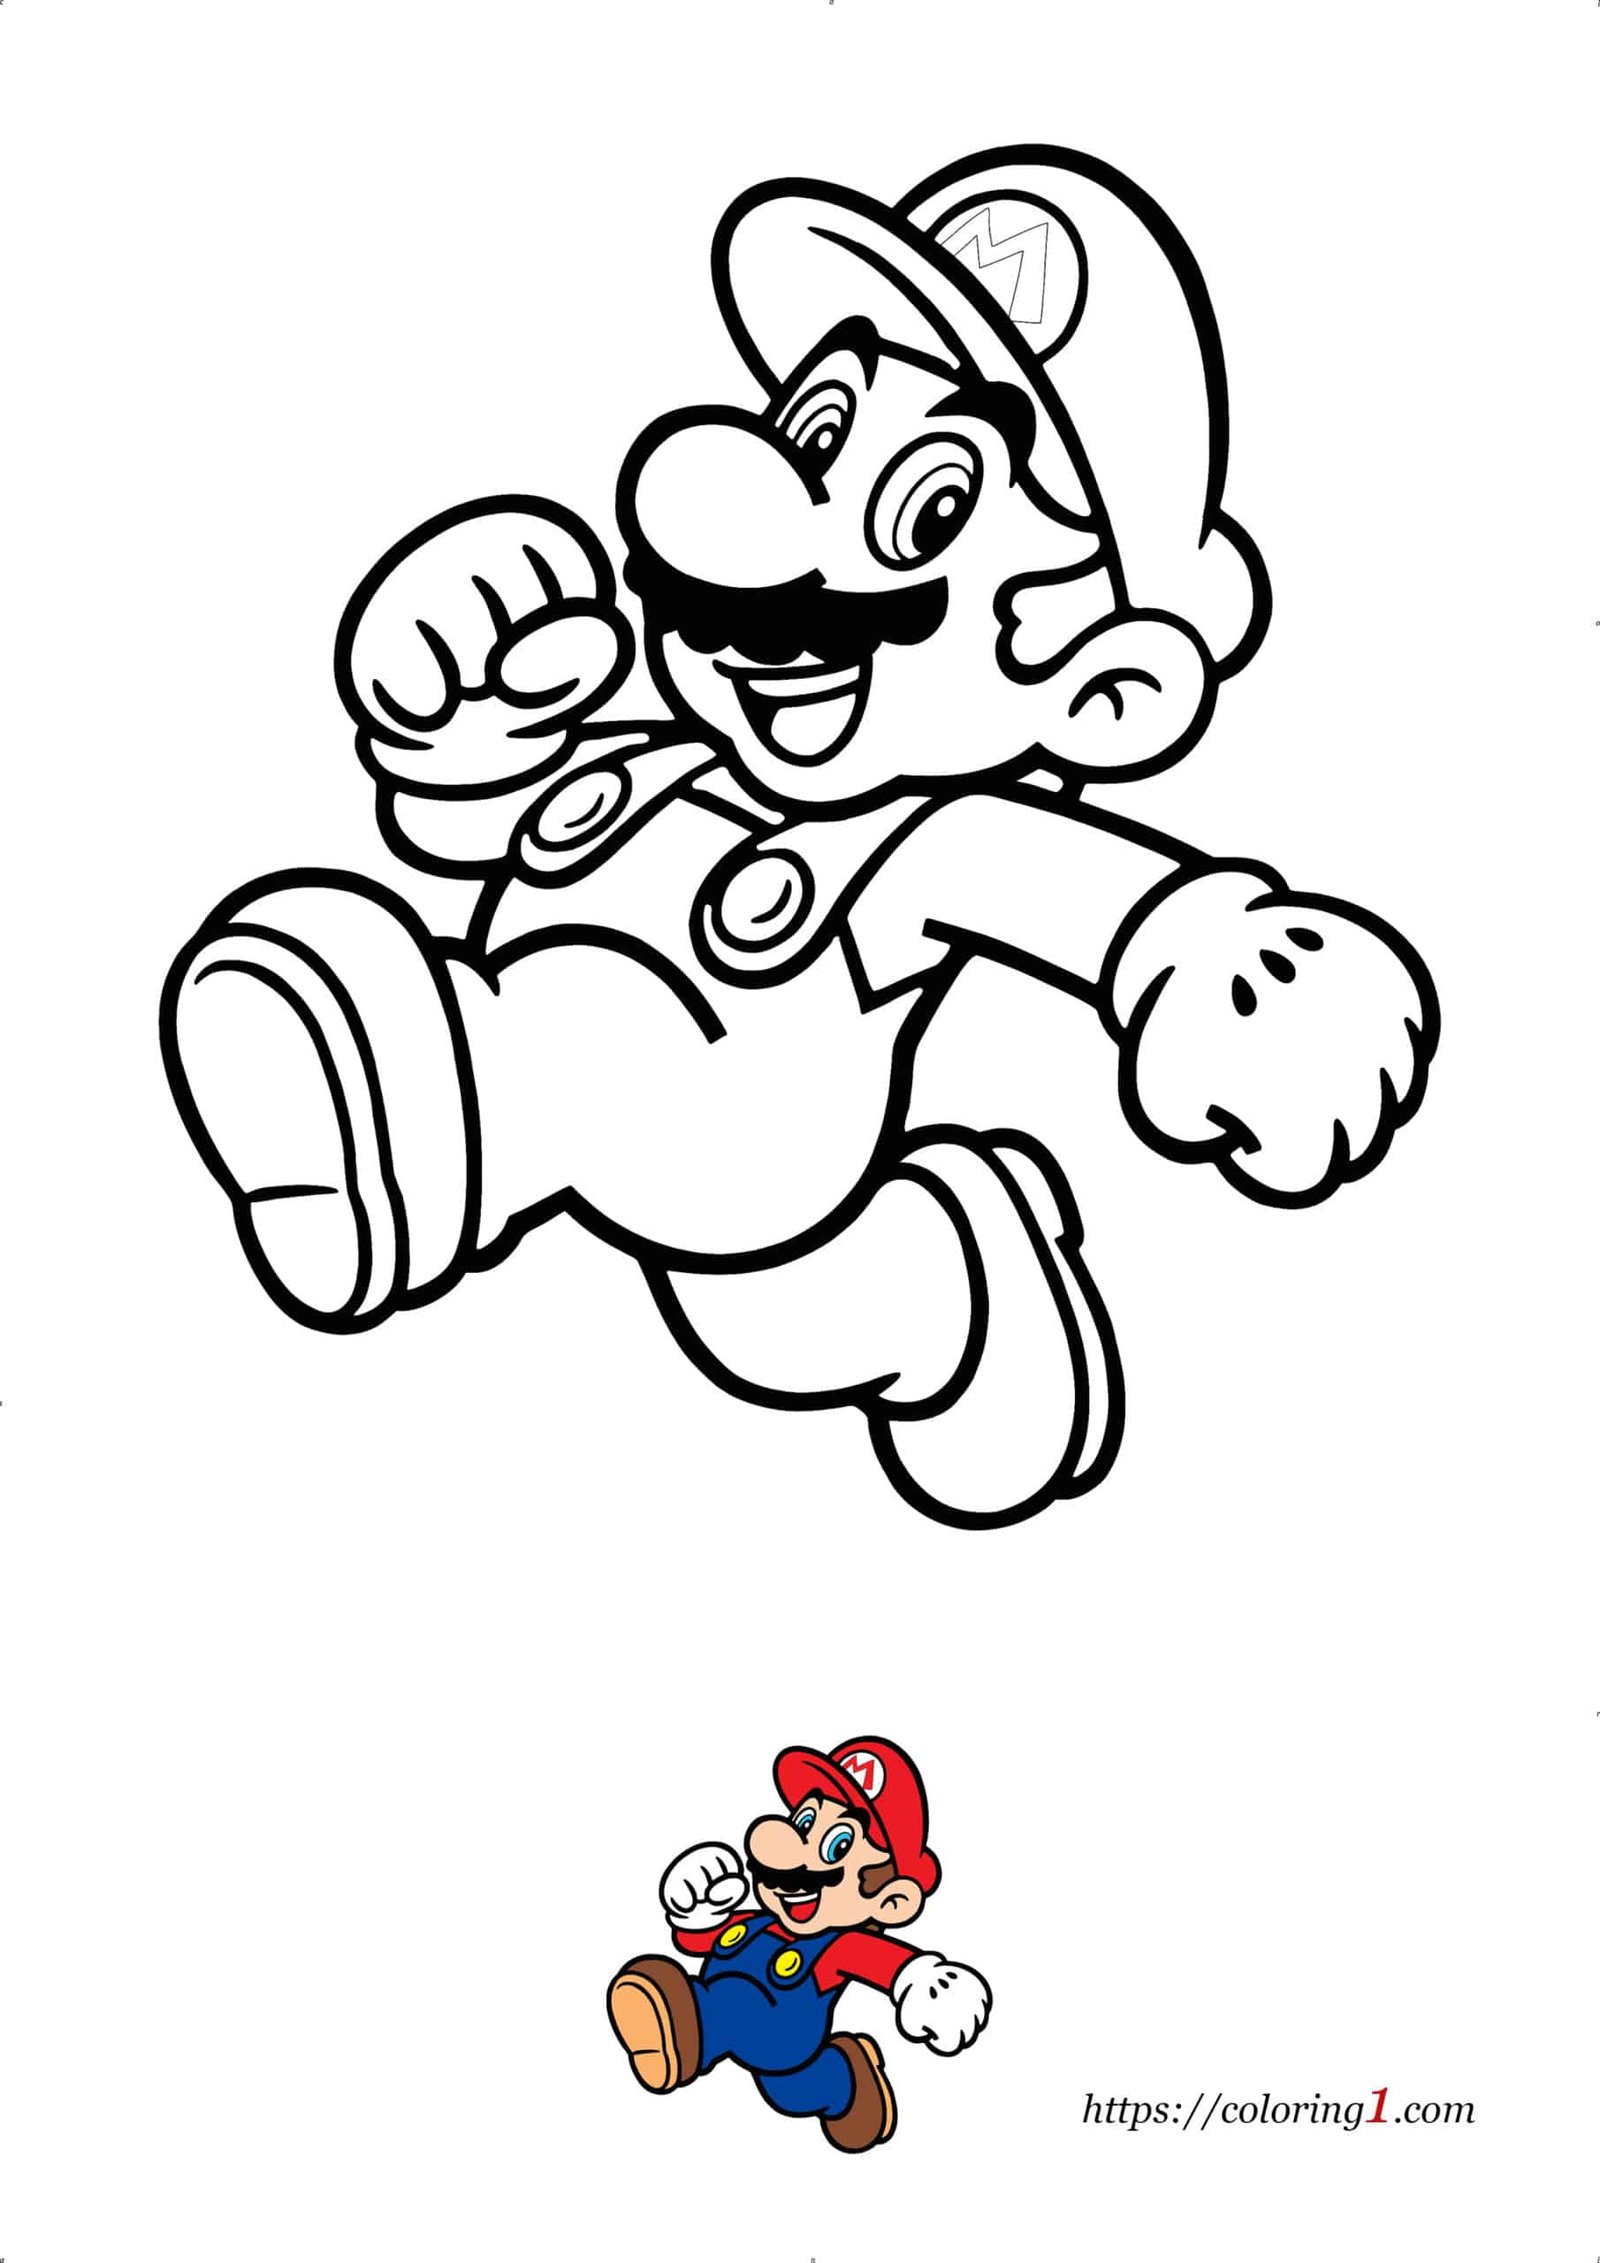 Super Mario coloring page to print online pdf